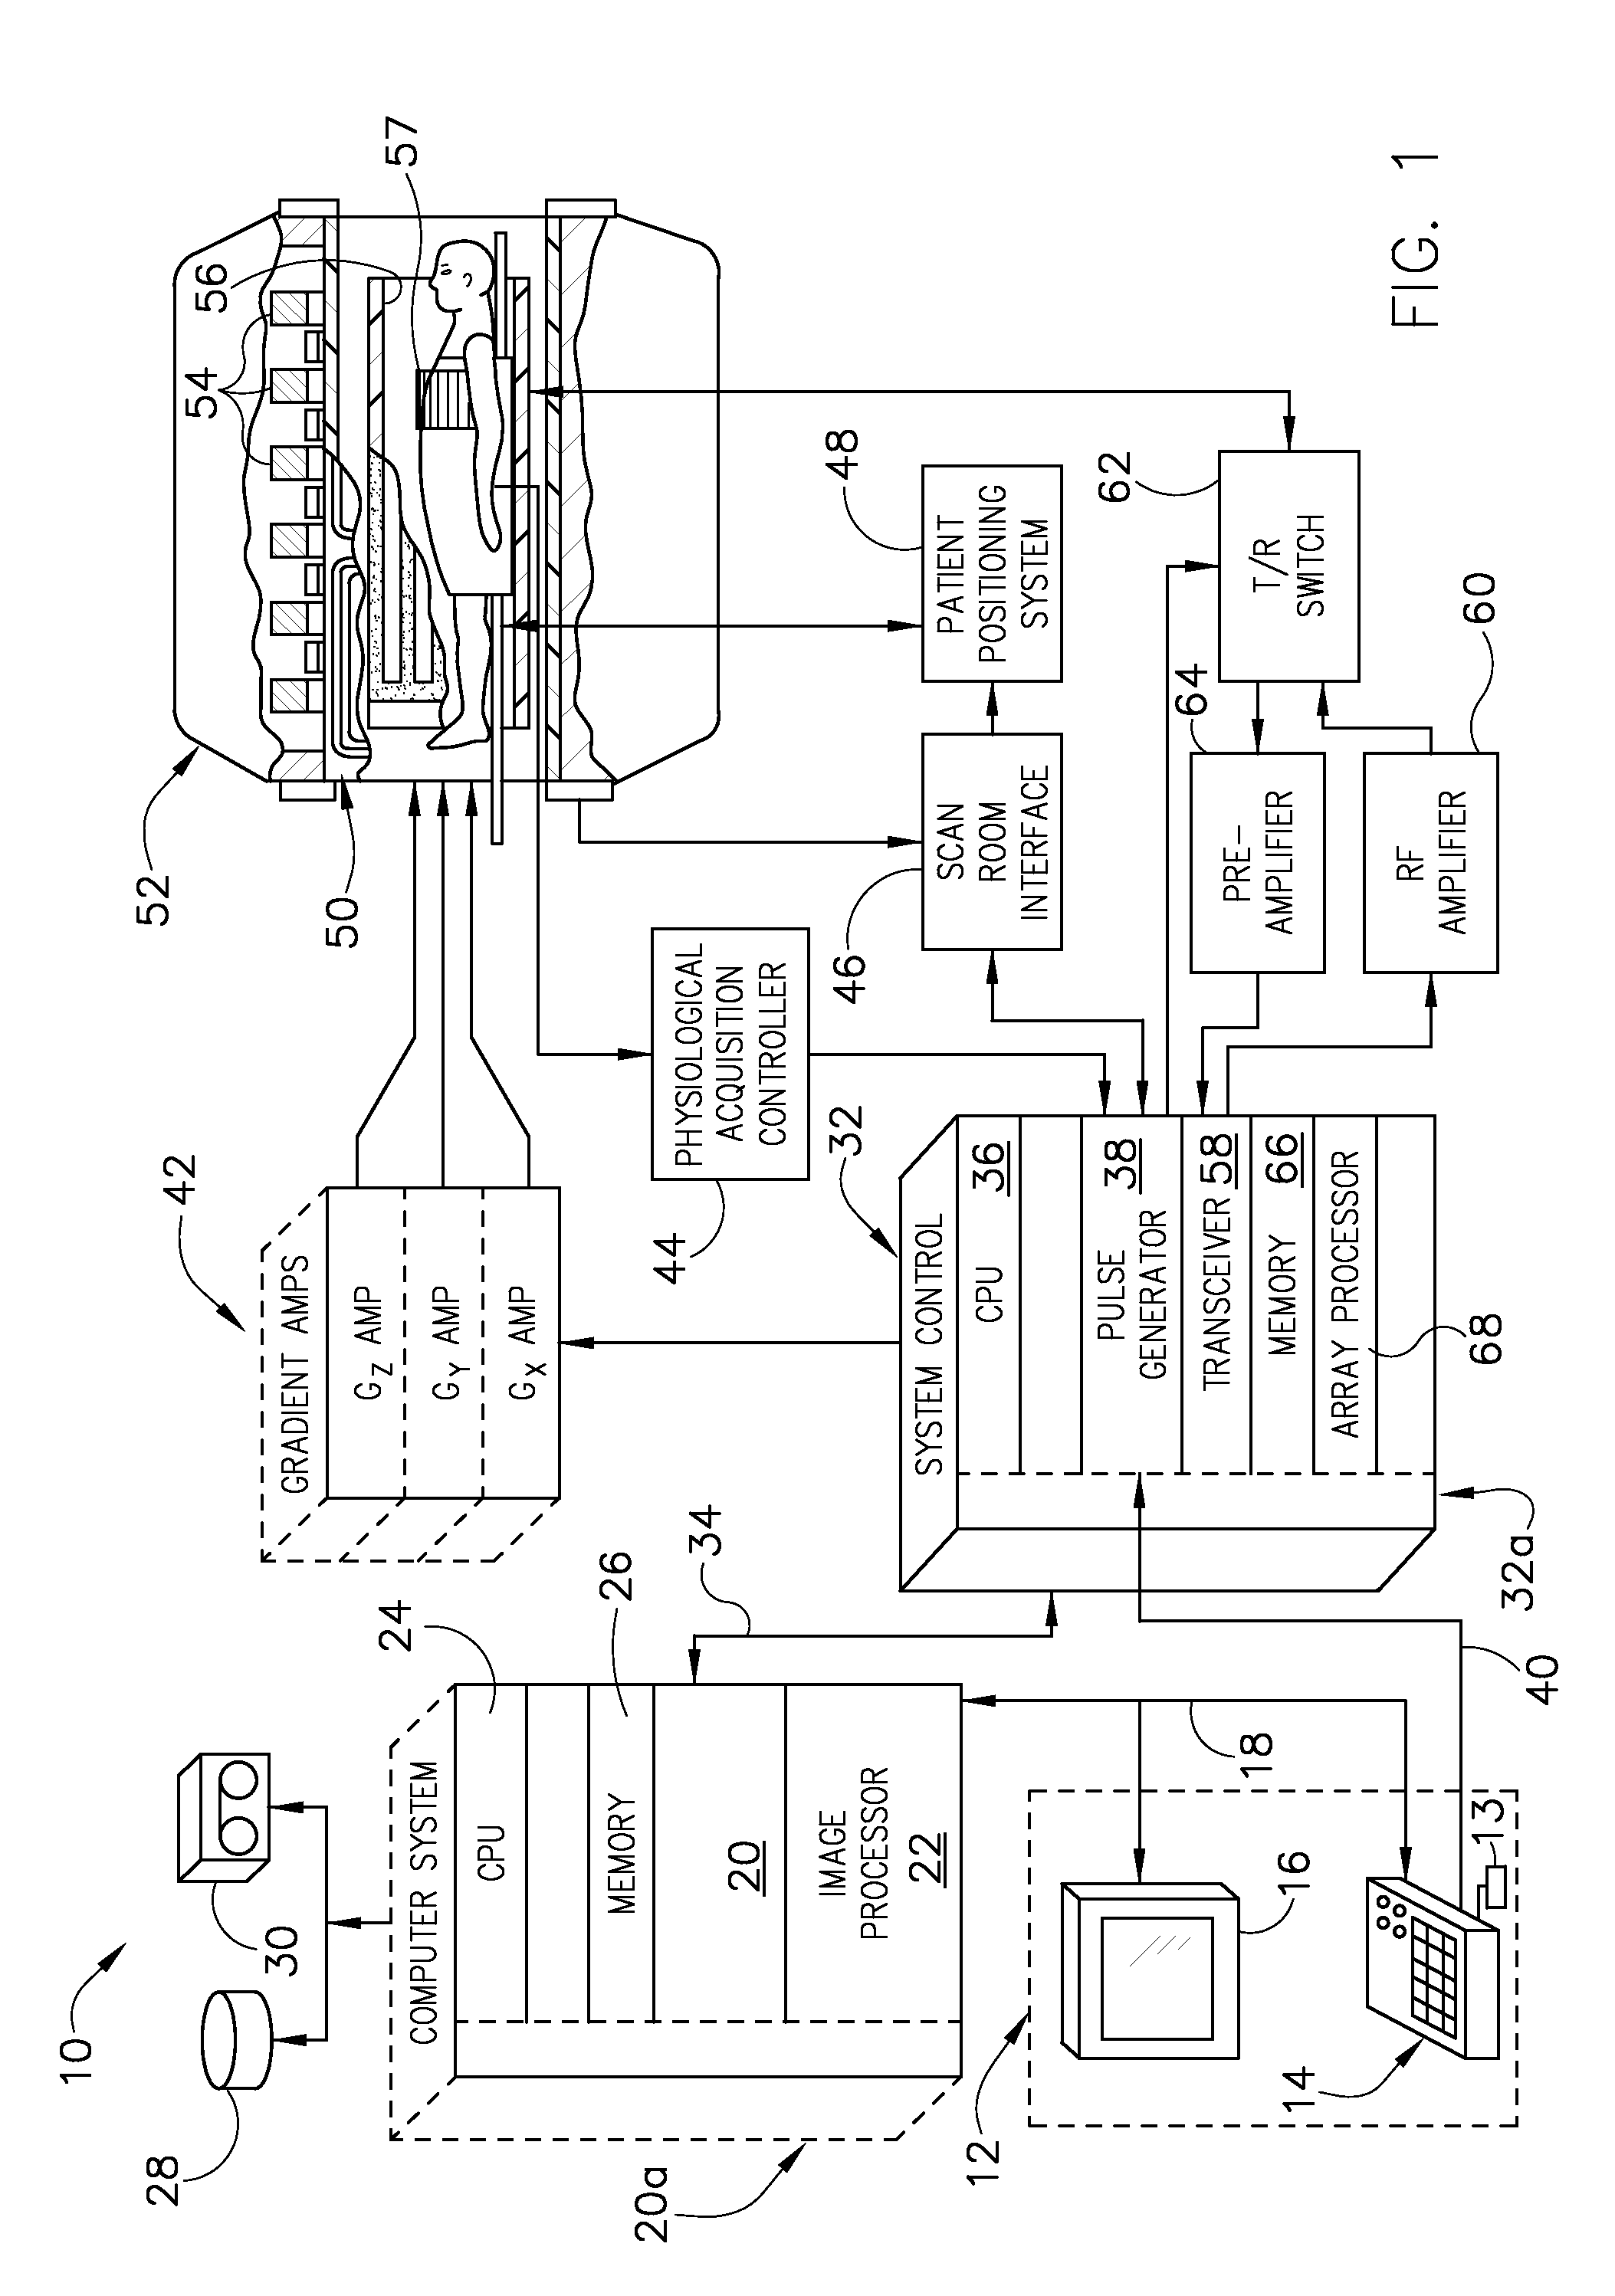 System and method for designing multi-channel RF pulses for MR imaging